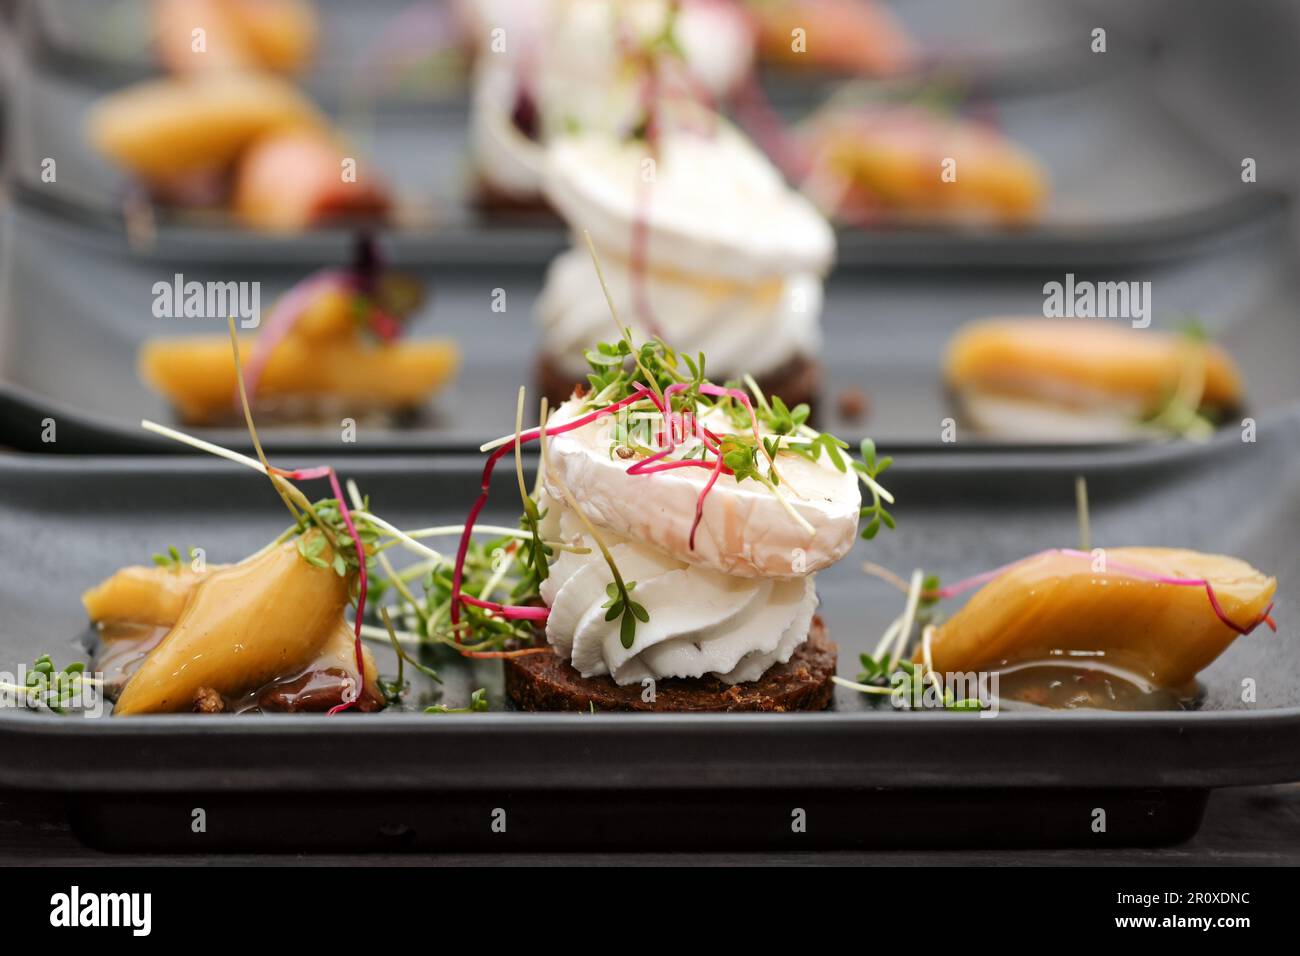 Appetizer dish from savory cream and goat cheese on pumpernickel bread with rhubarb pieces and sprout garnish served on black plates, selected focus, Stock Photo